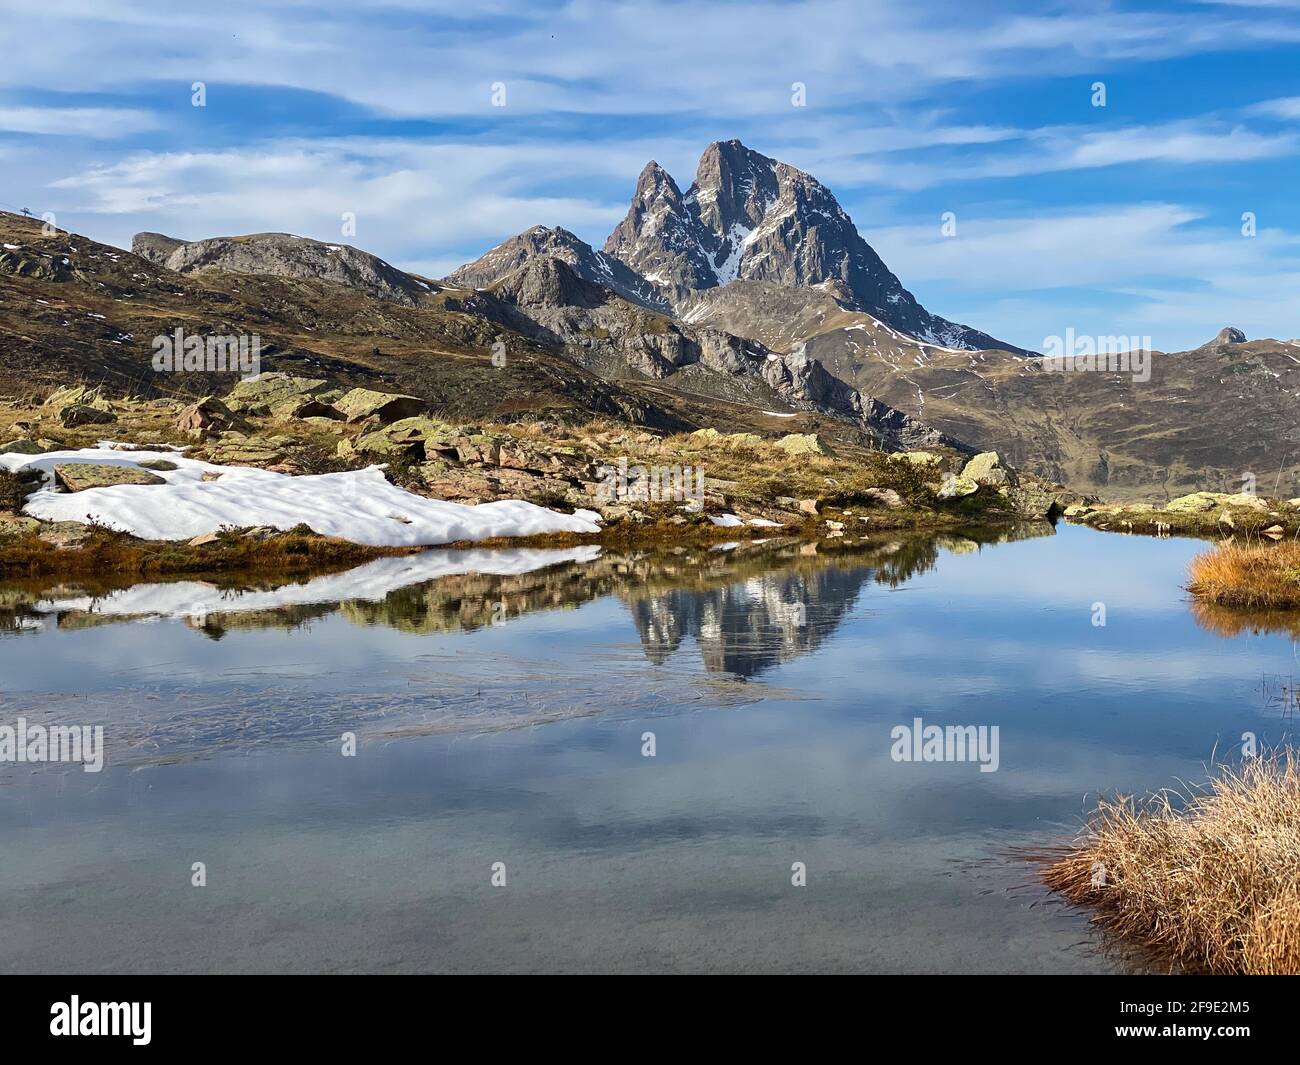 views of mountains and lakes in Anayet, in the Portalet area, in the Aragonese Pyrenees near the French border. Huesca, Spain. landscape Stock Photo